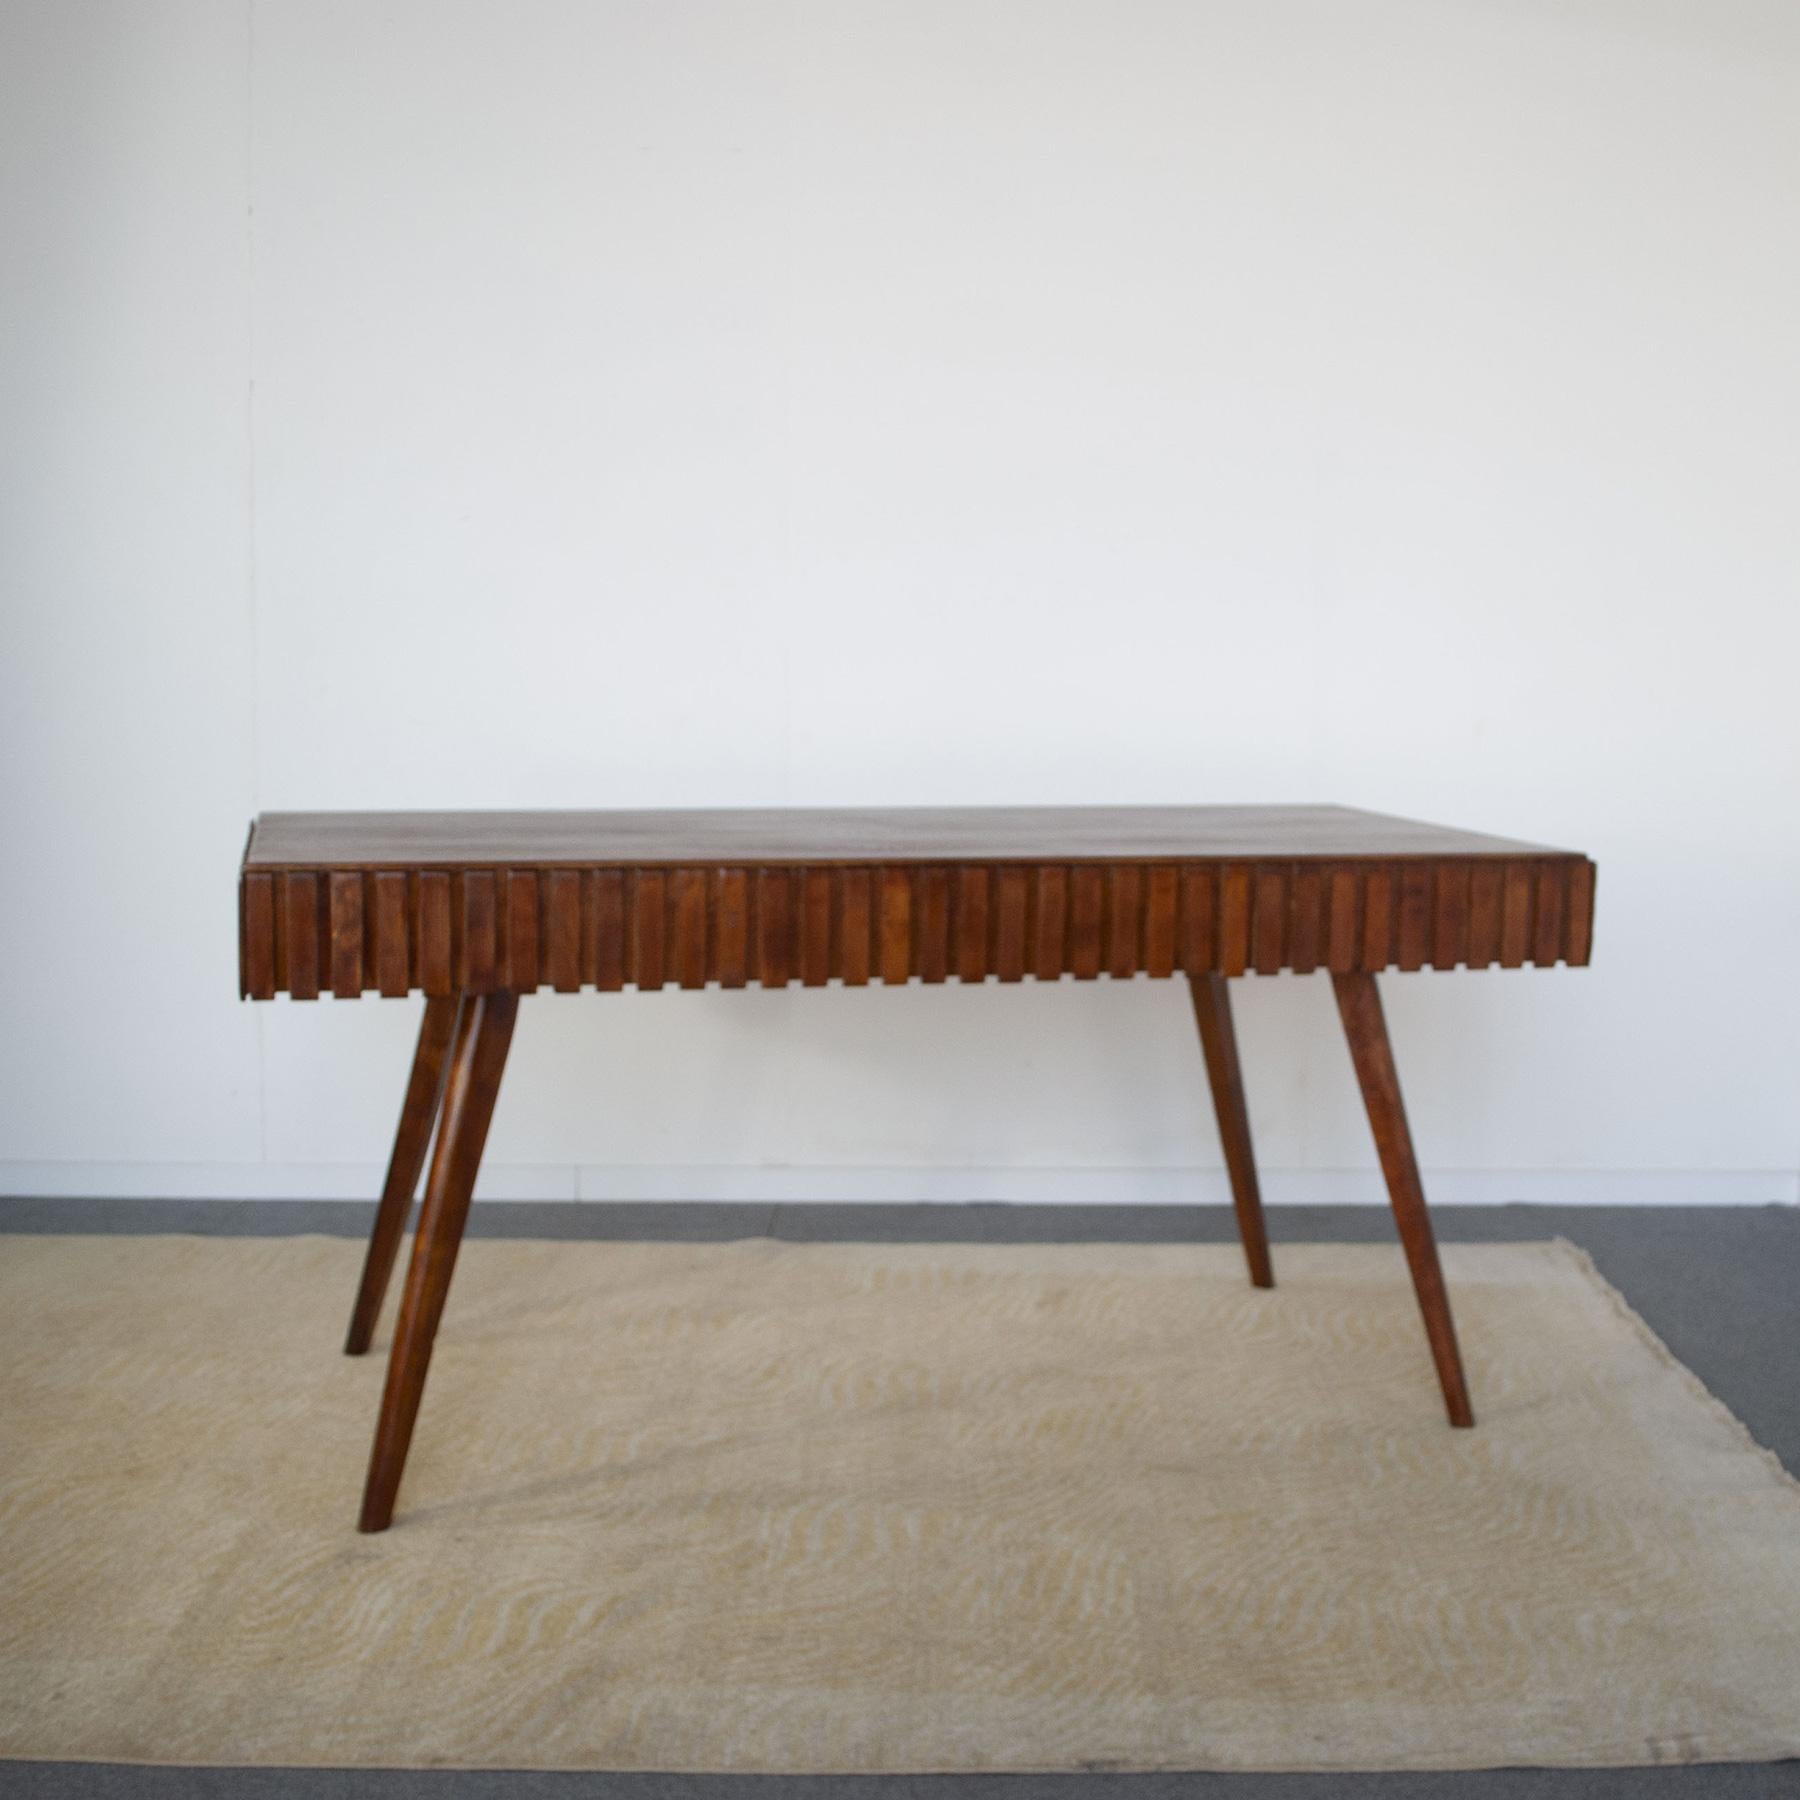 Simple but elegant inlaid and worked wood table attributed to the early work of Paolo Buffa late 1950s. The table presents two hidden drawers that, in addition to being storage, can serve as an extension leaf.

The table has two extensions of 37 cm